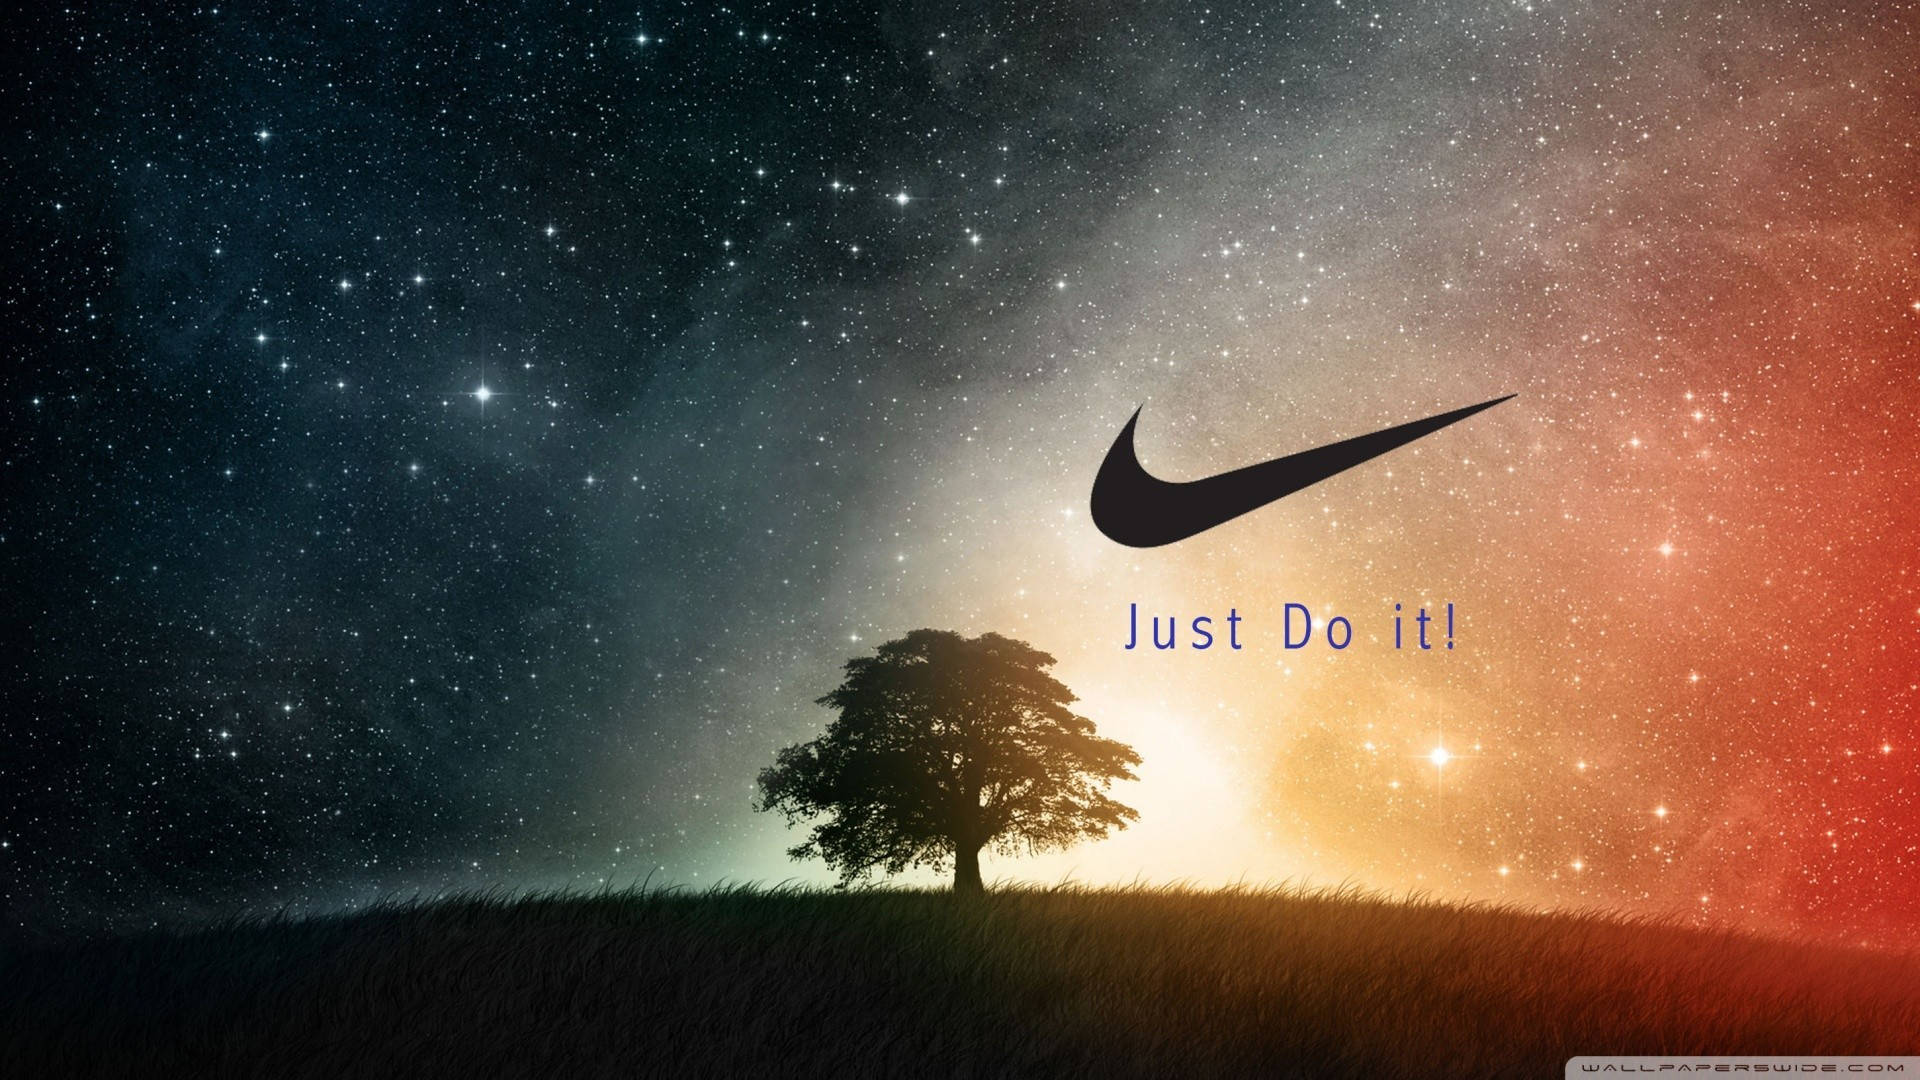 Just Do It - The Unstoppable Spirit Of Determination And Positivity Wallpaper